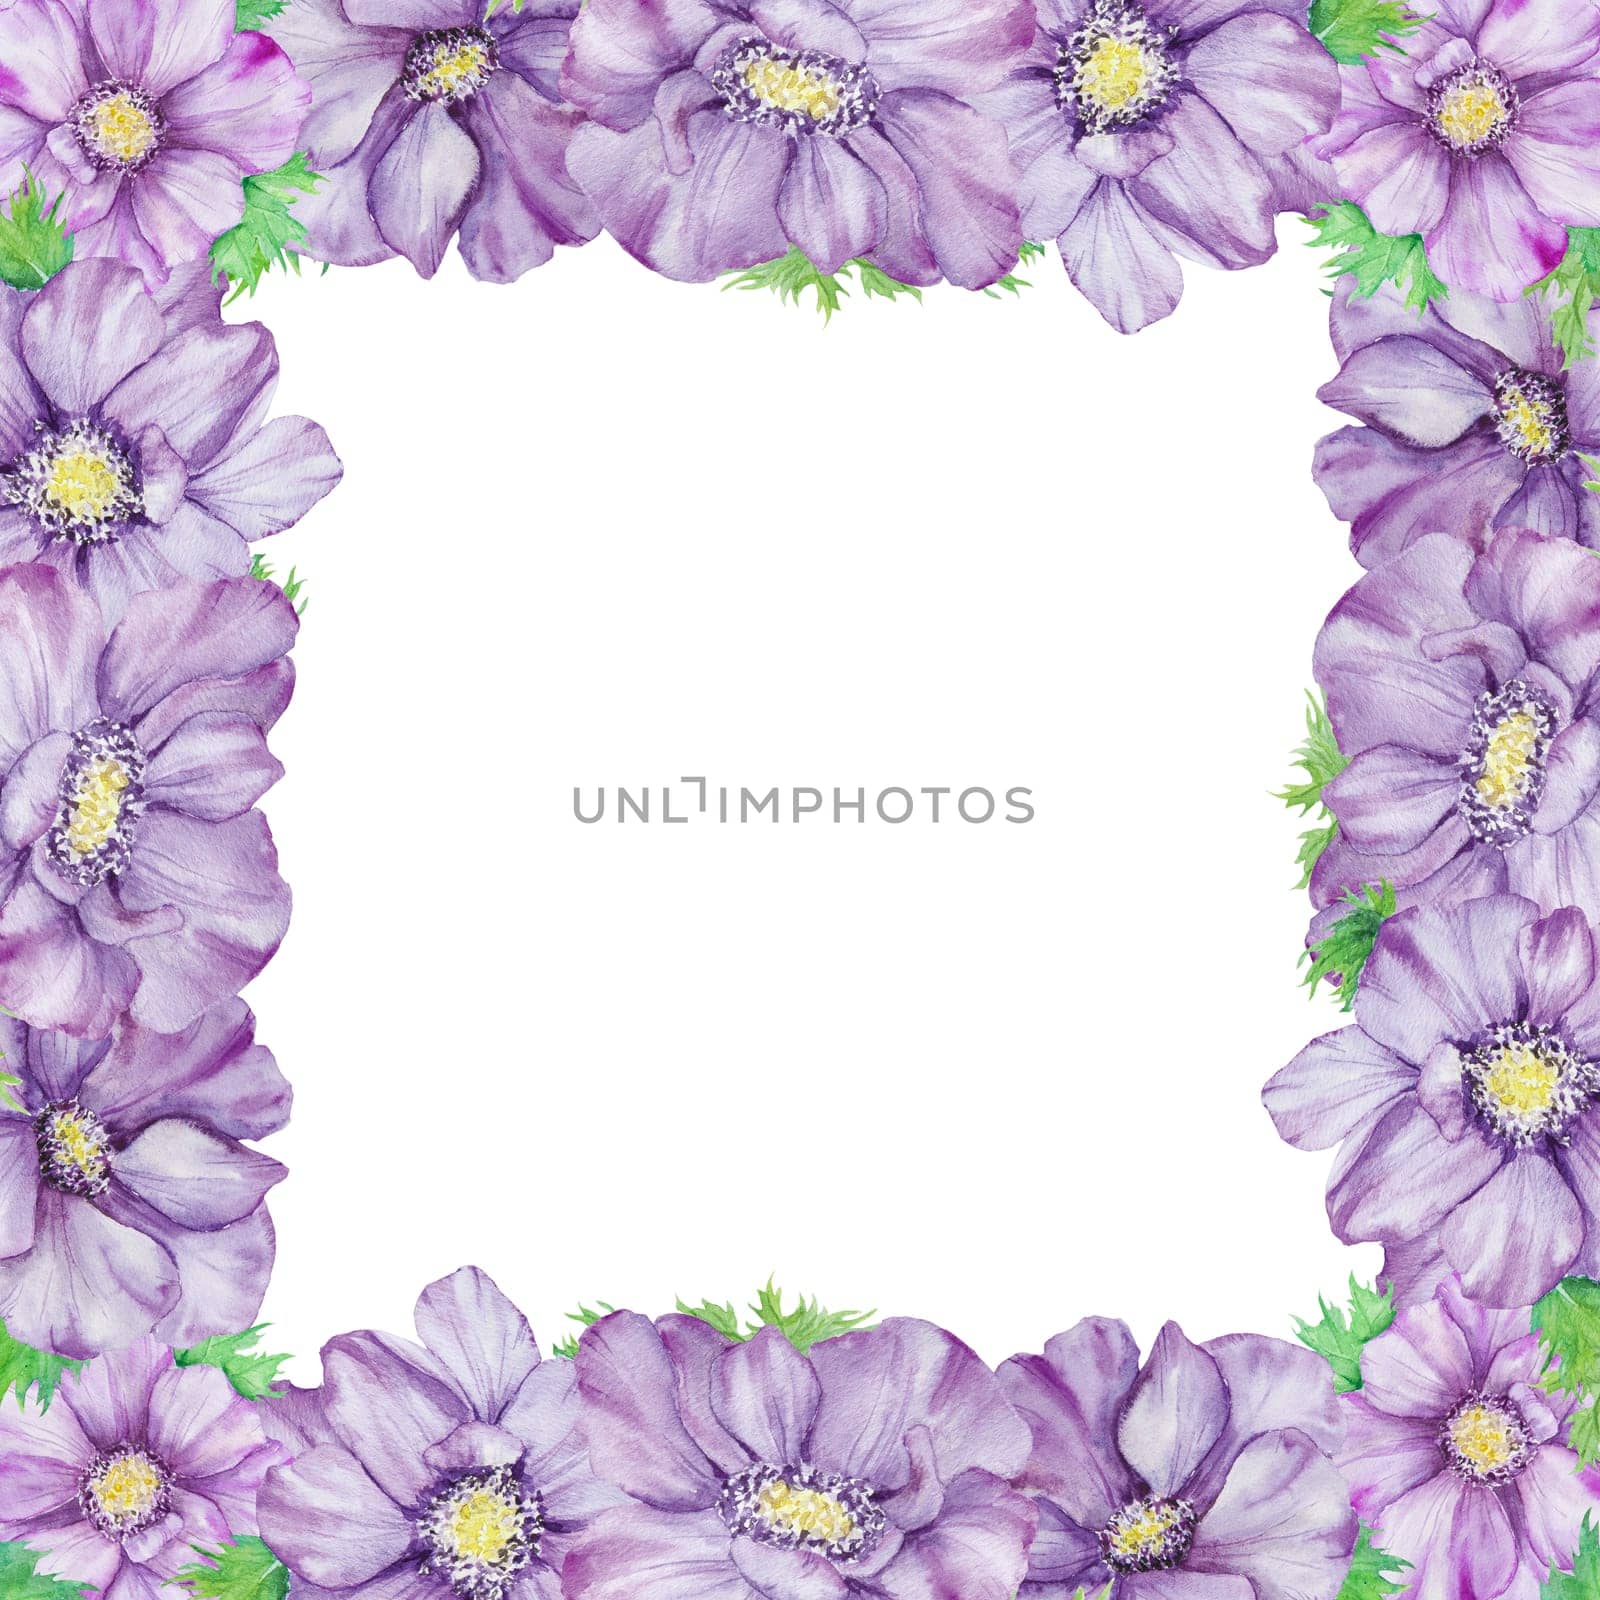 Watercolor hand drawn frame of purple anemones with green leaves isolated on white background. by florainlove_art